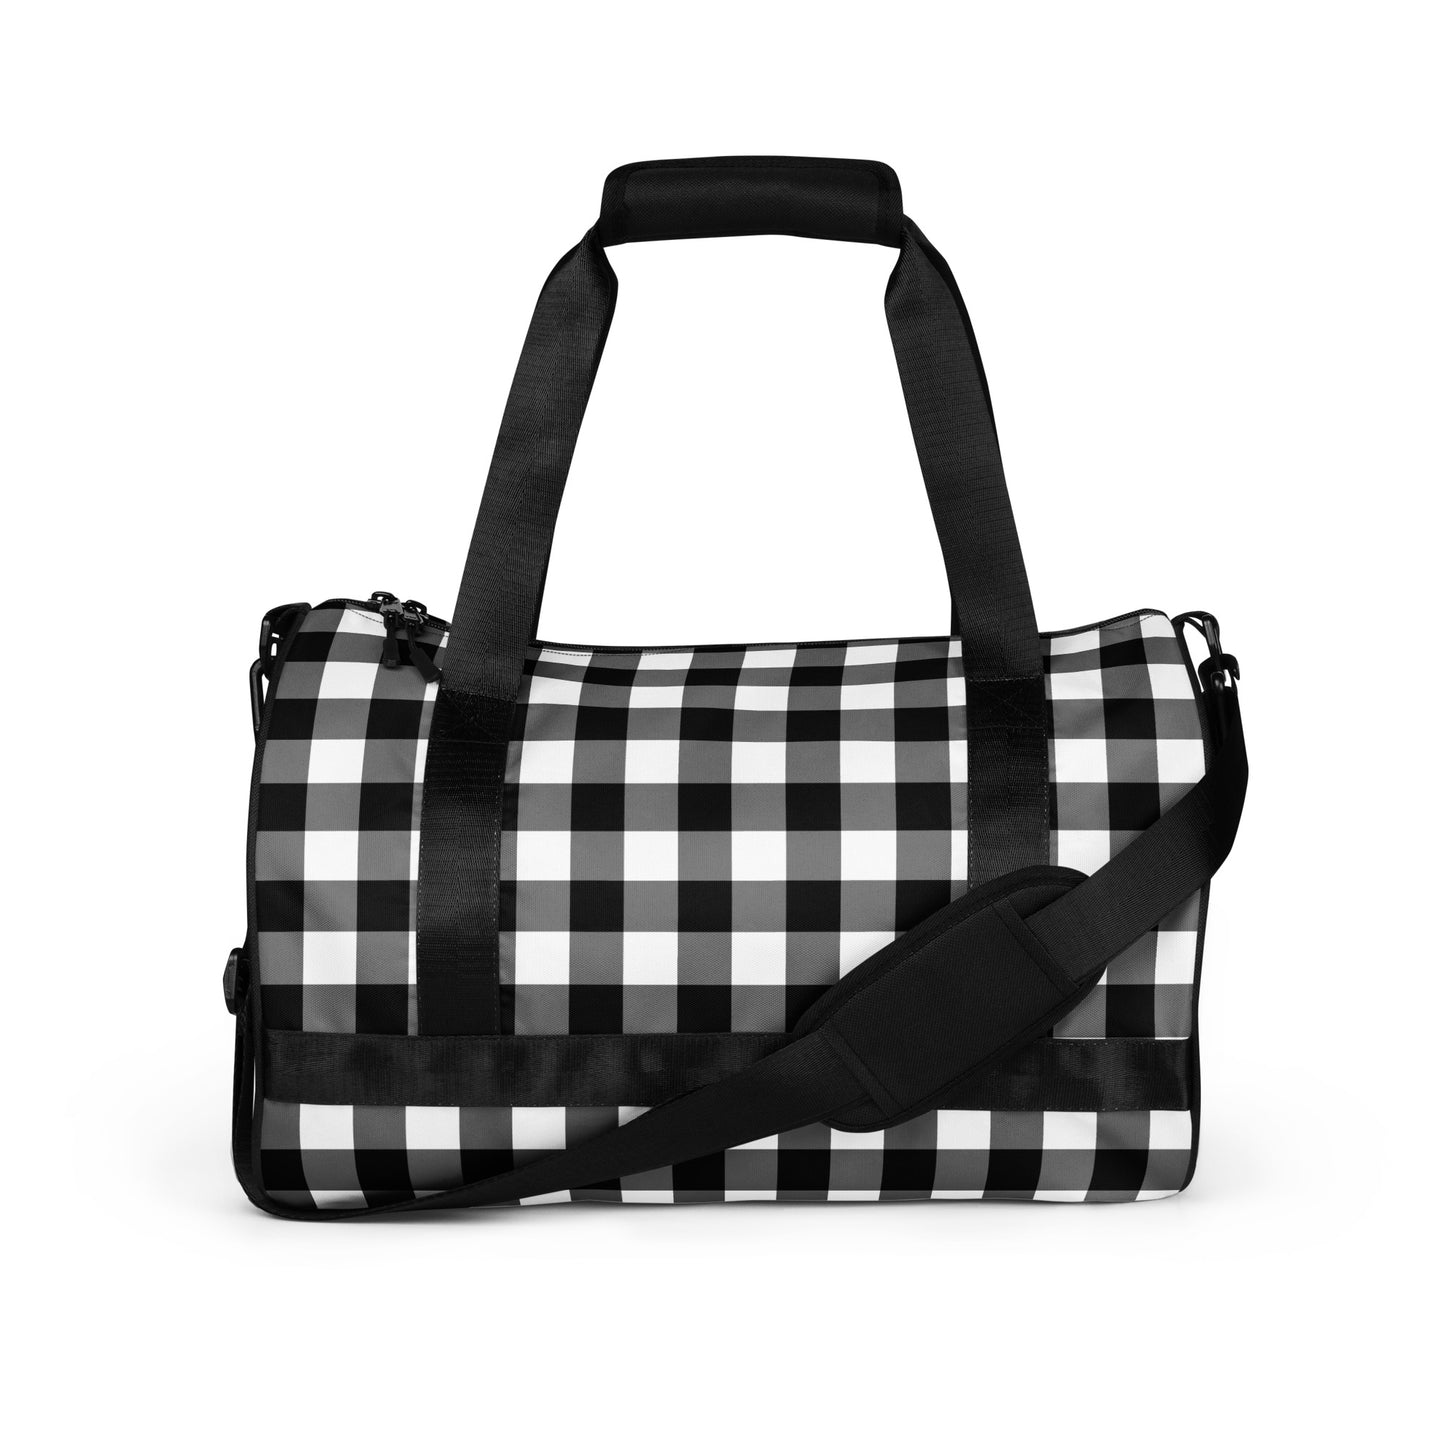 Badass Black Gingham Gym Duffle Workout Bag | Pinup Couture Relaxed